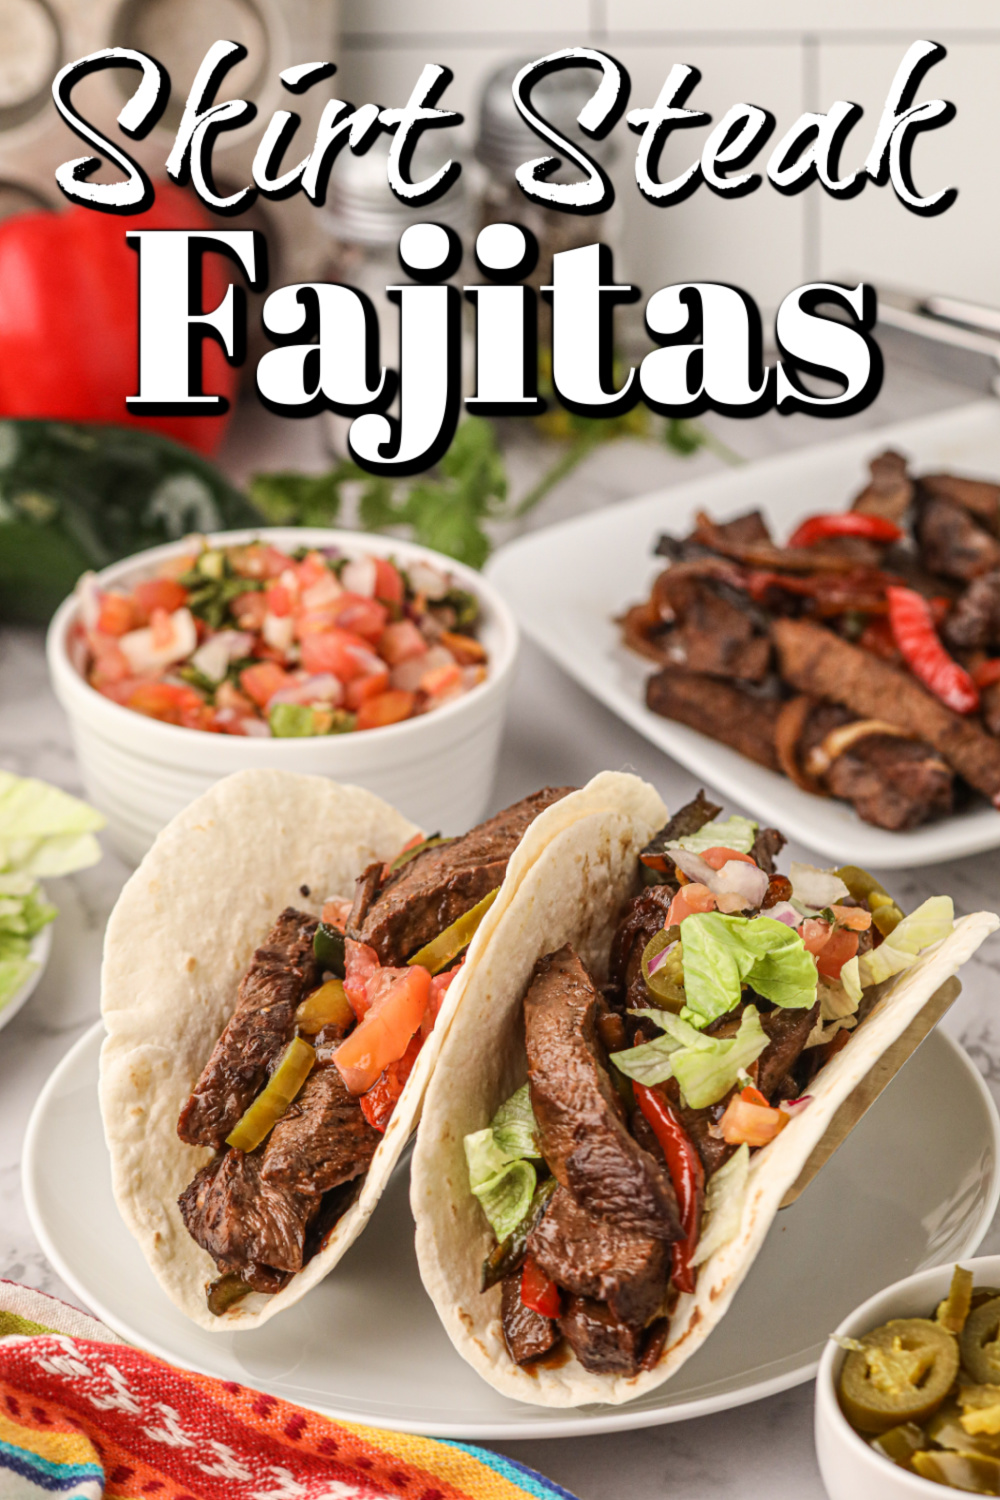 Grilling skirt steak makes the best beef fajitas, and the wonderful marinade creates a south-of-the-border flavor!